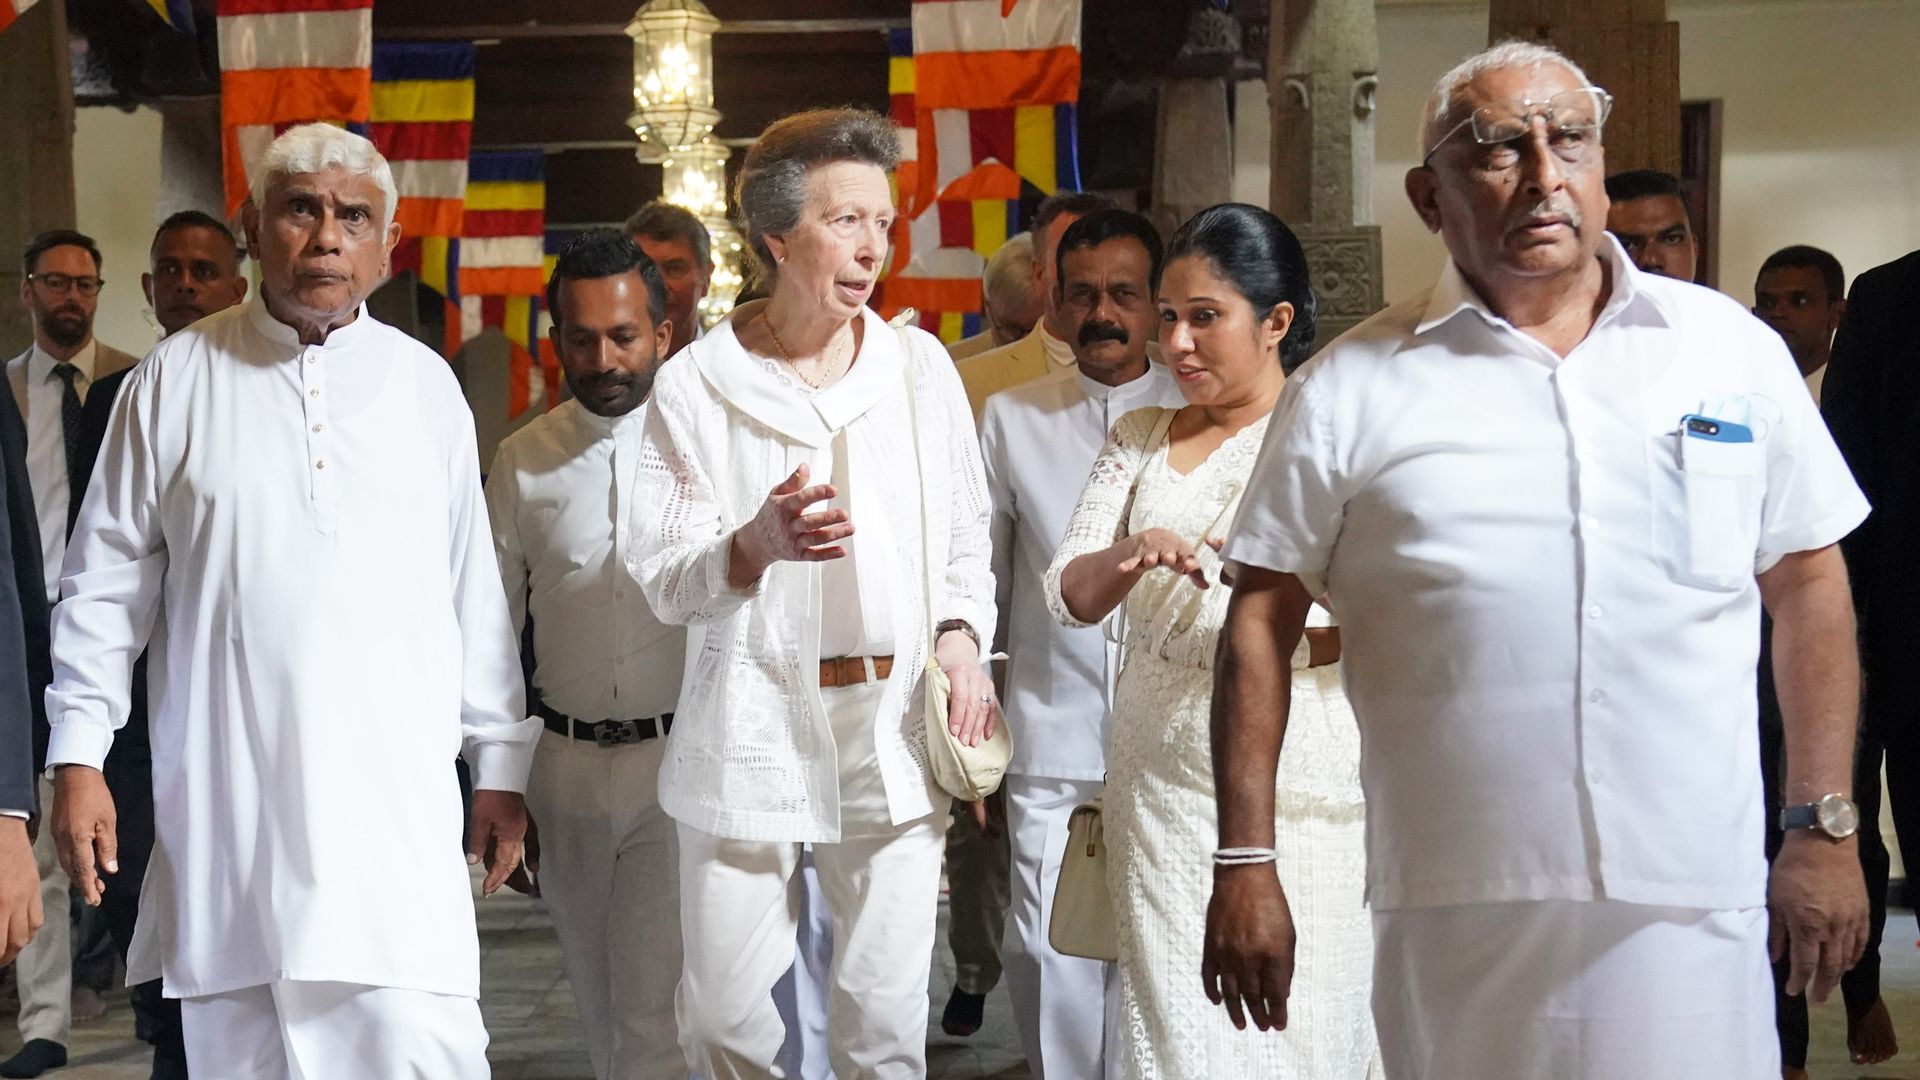 Princess Anne wearing all white-outfit to Buddhist Temple, Sri Lanka